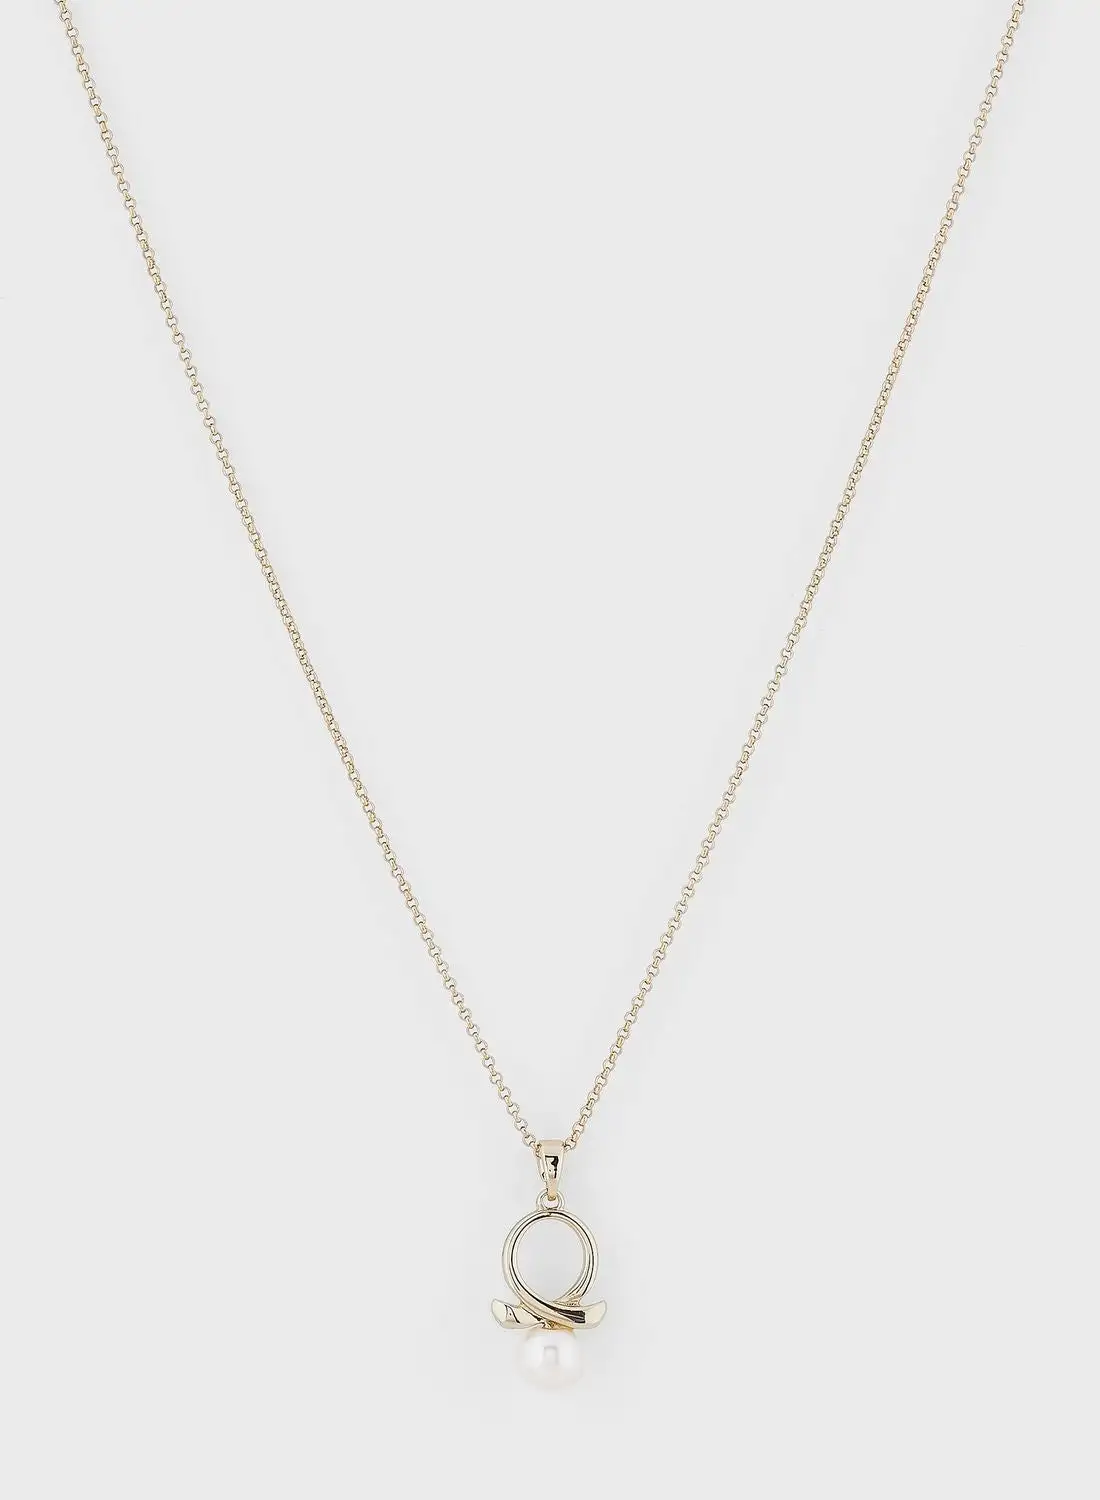 BUCKLEY LONDON Gold And Pearl Bow Pendant Necklace